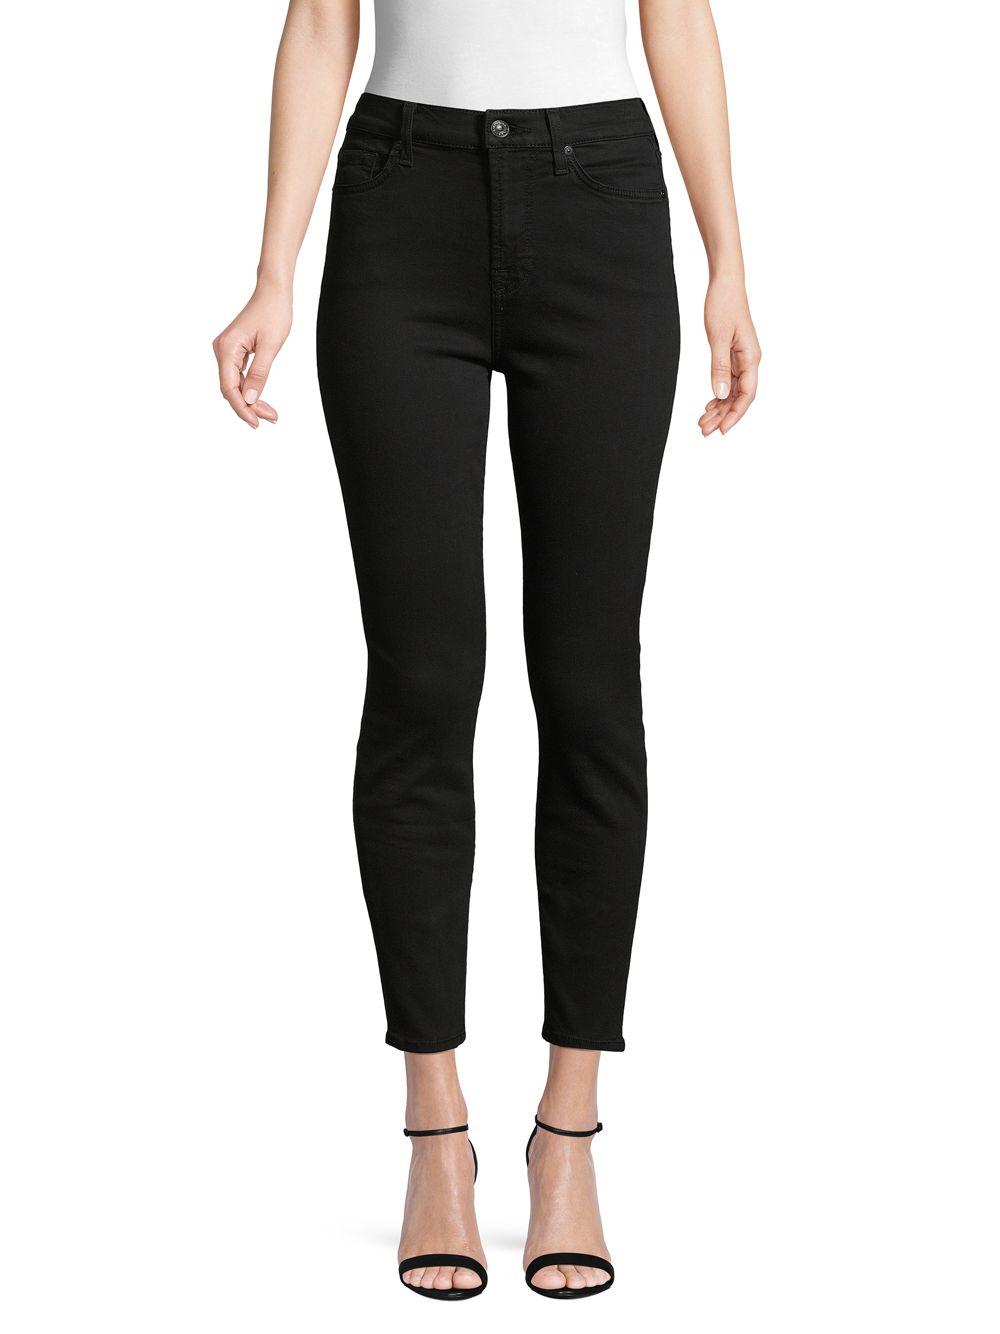 7 For All Mankind Gwenevere High-waist Cropped Skinny Jeans in Black - Lyst